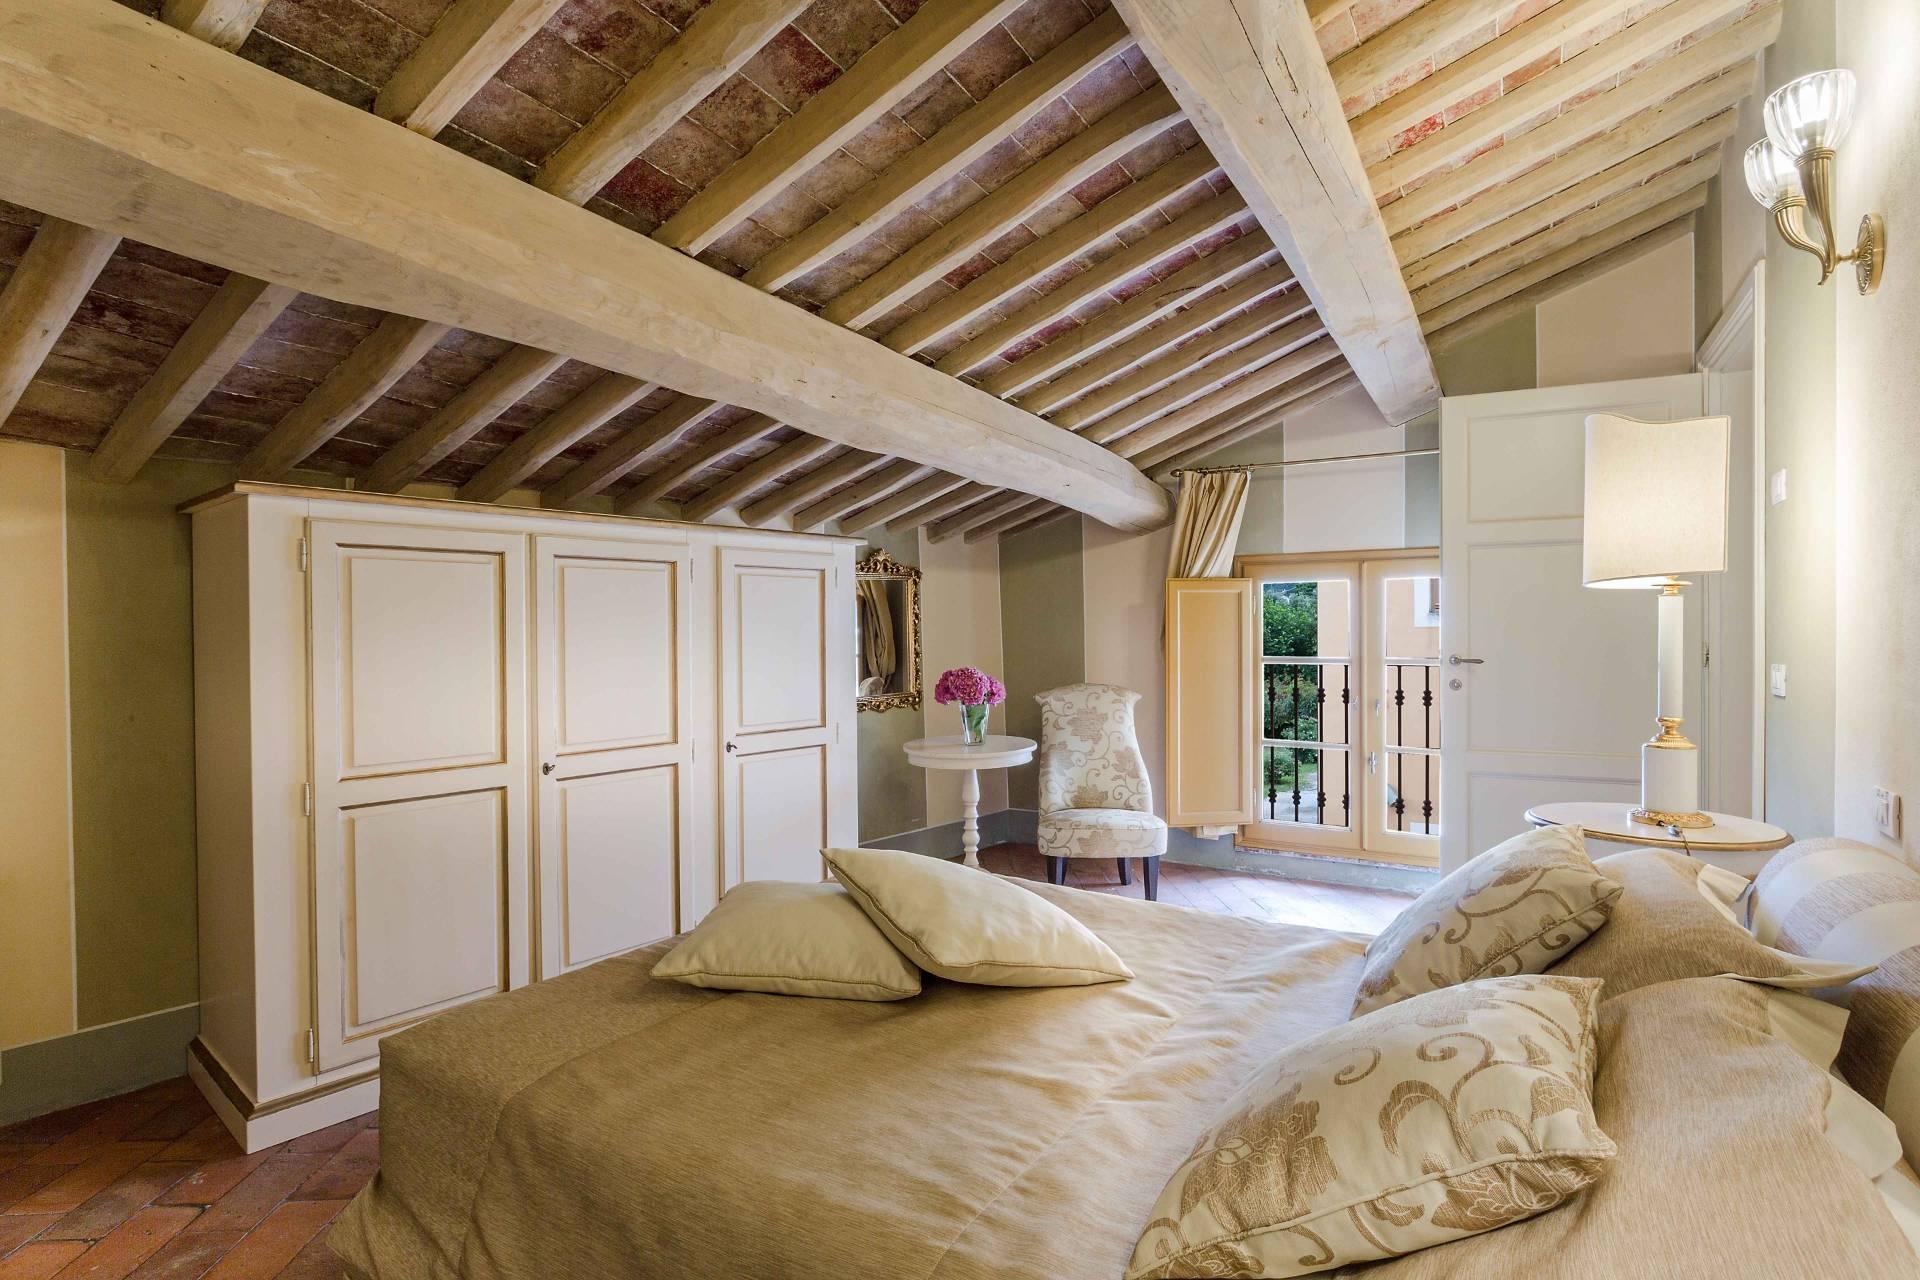 A traditional Tuscan countryhome in a poetic Italian setting - 37